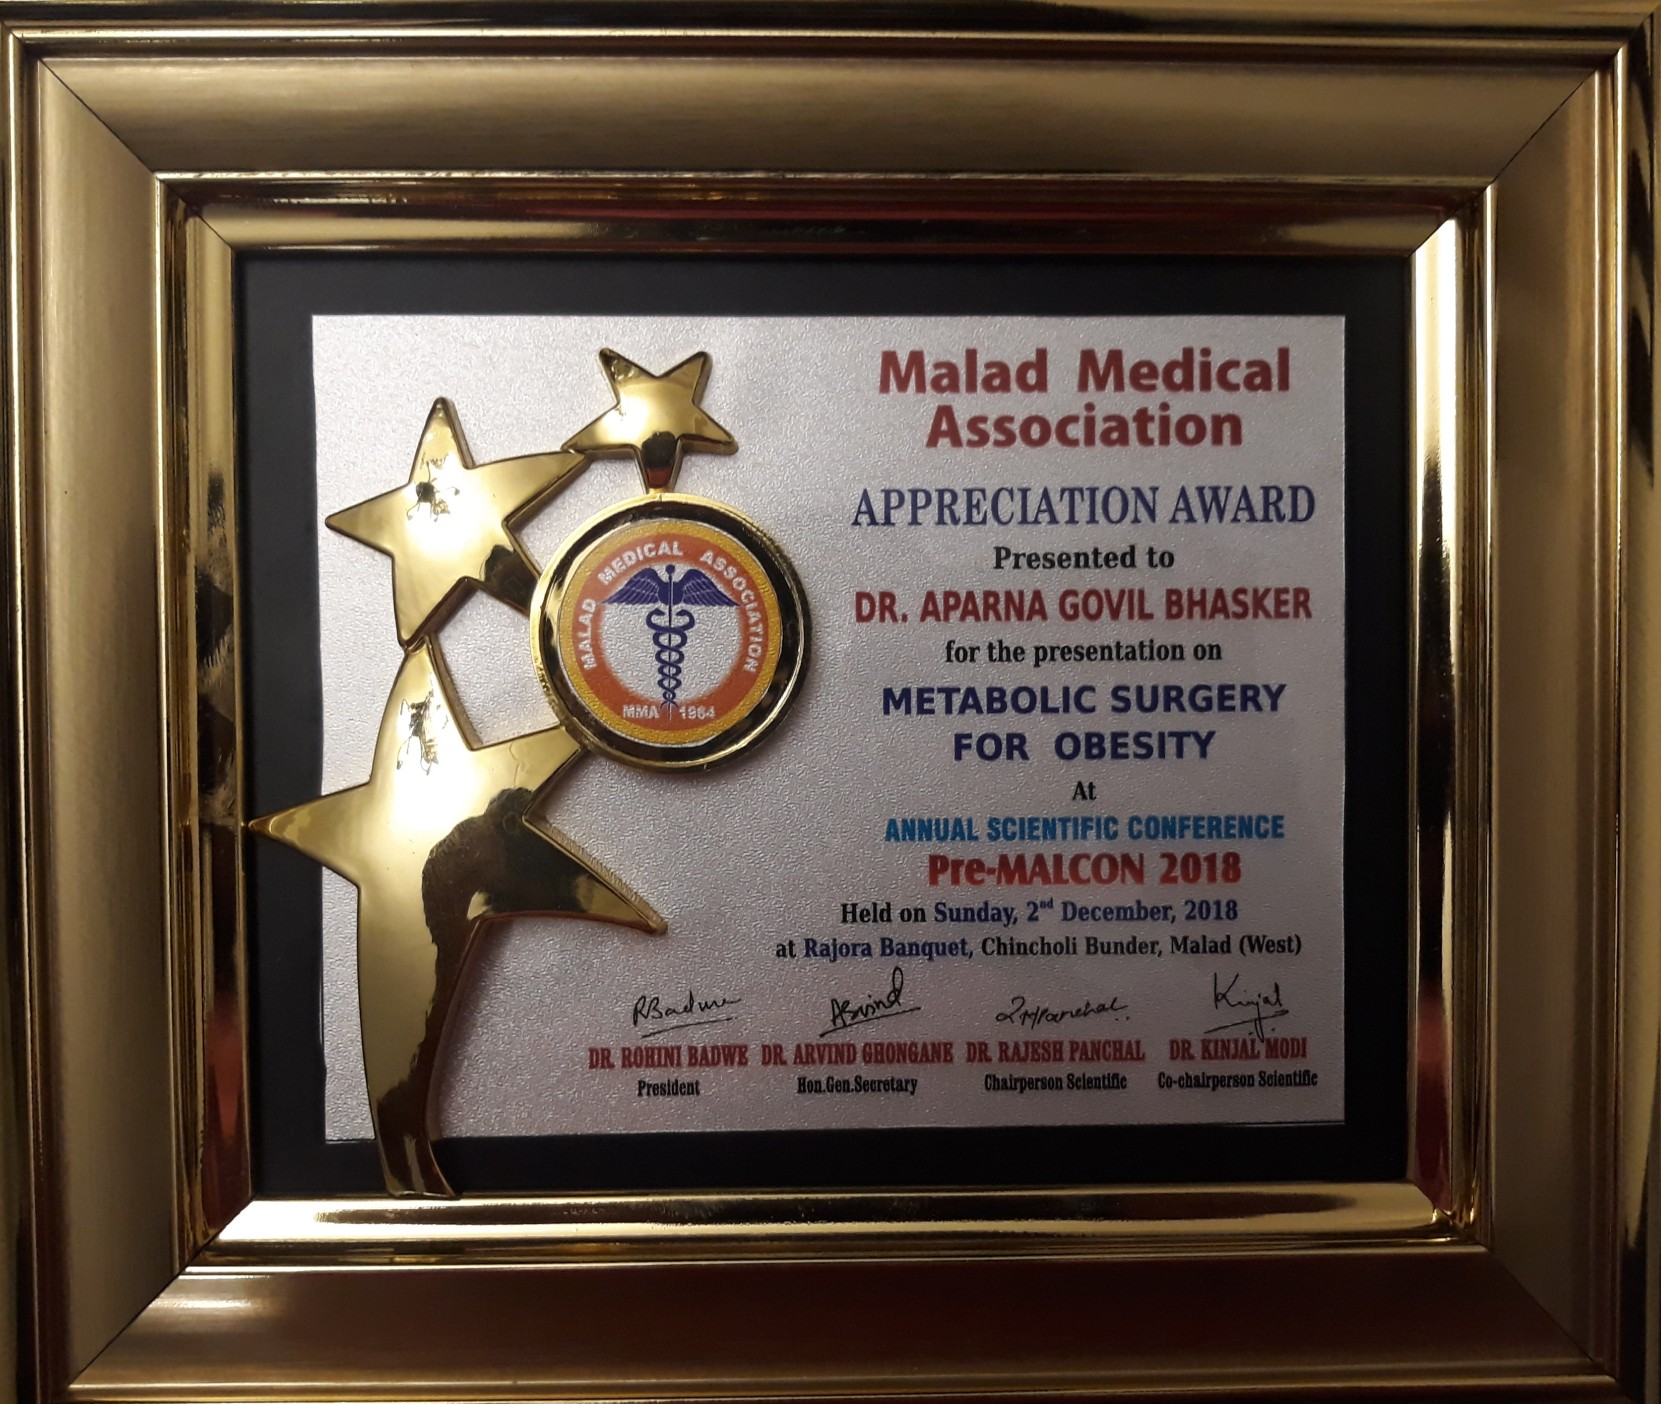 Honoured to have spoken on Metabolic surgery for treatment of obesity at PRE MALCON in Malad Medical Association on 2nd December 2018 (1)